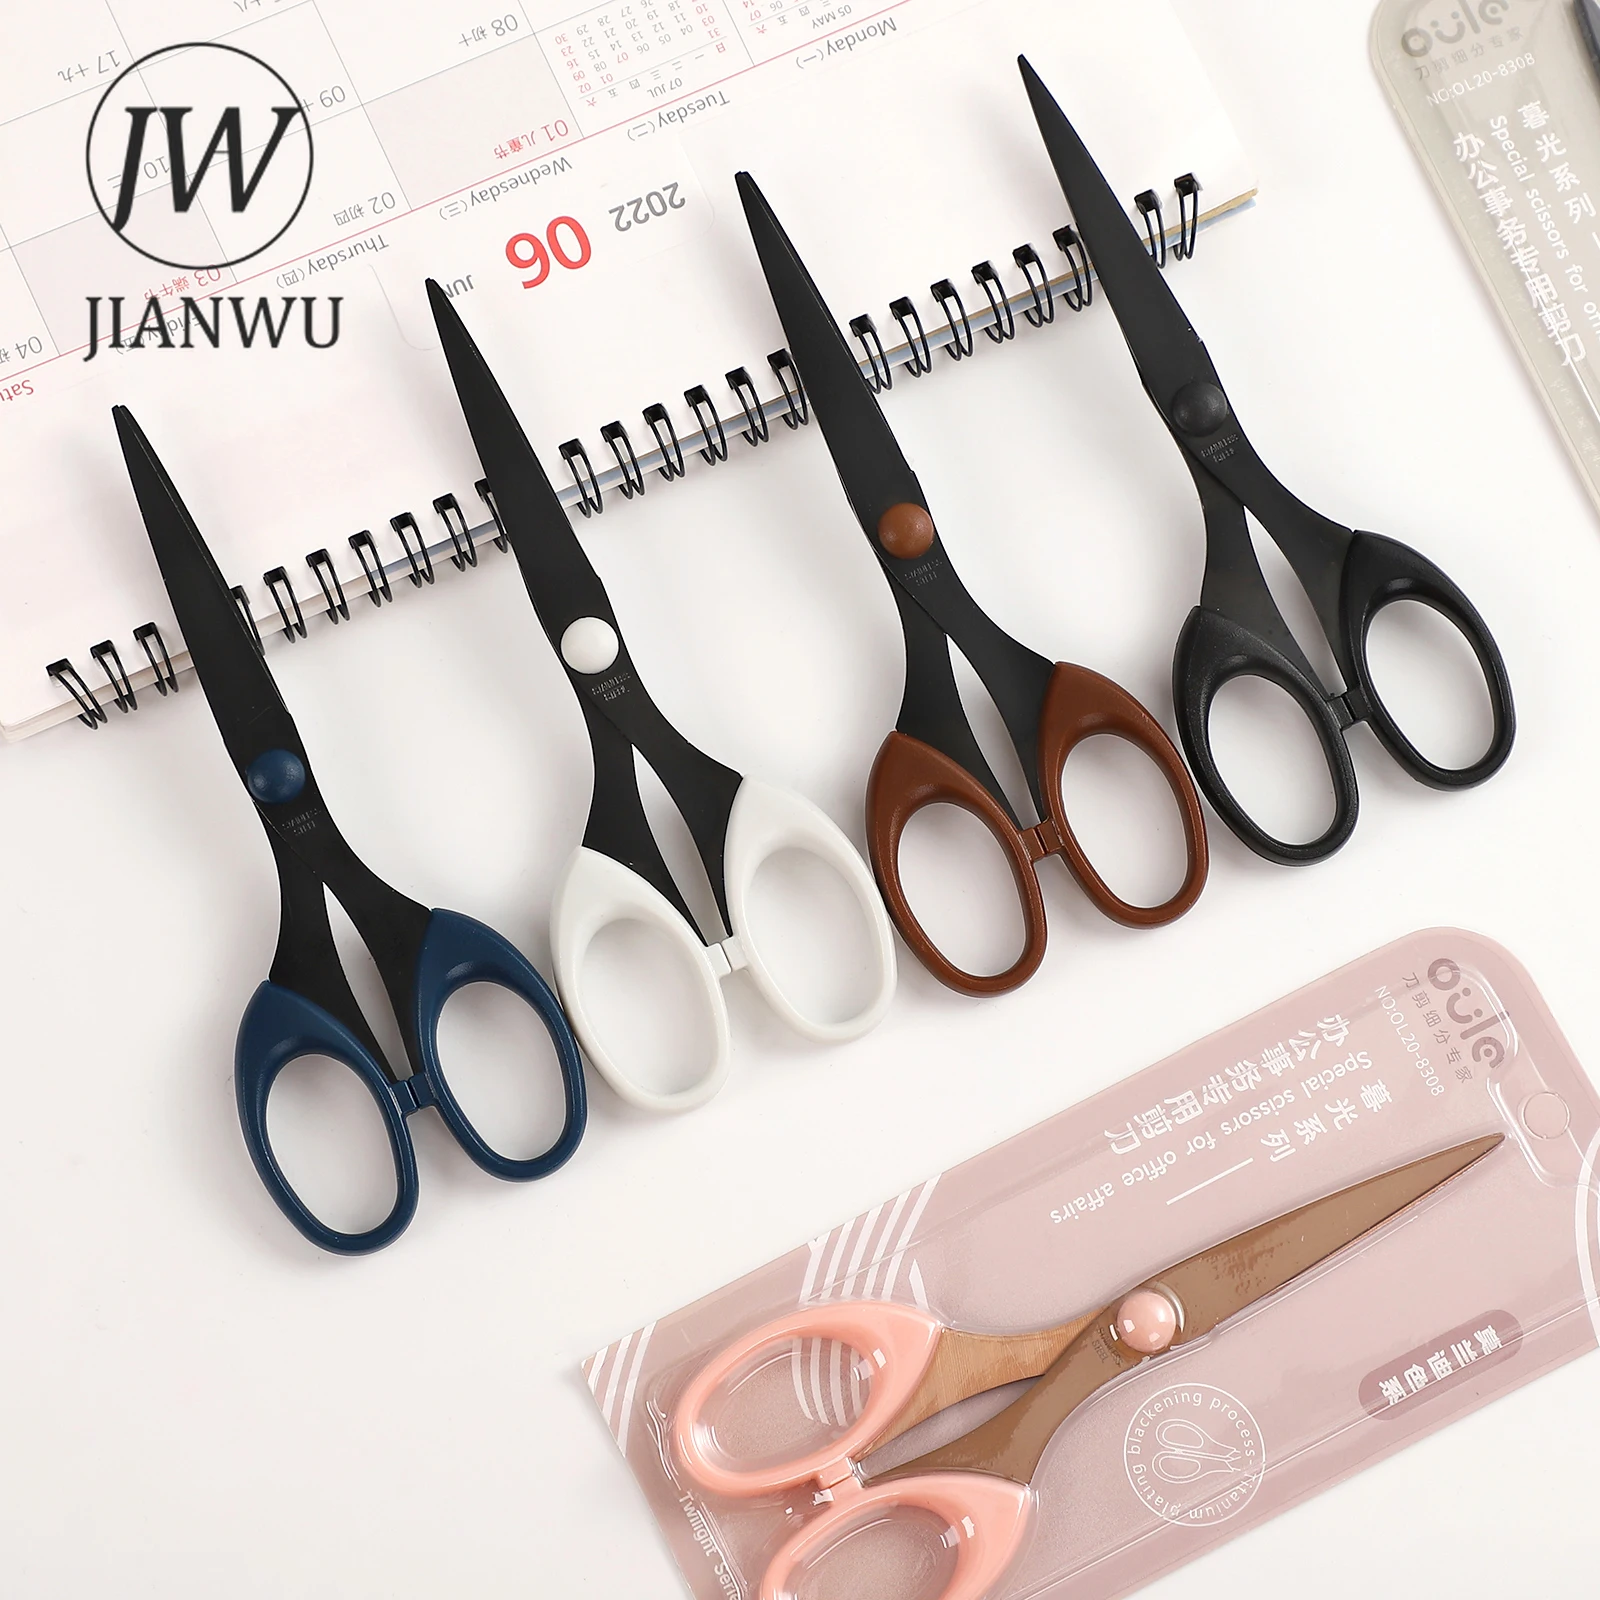 JIANWU Simple Stainless Steel Scissors Multifunction Student Art Cutting Stationery Scissors Office School Supplies Stationery